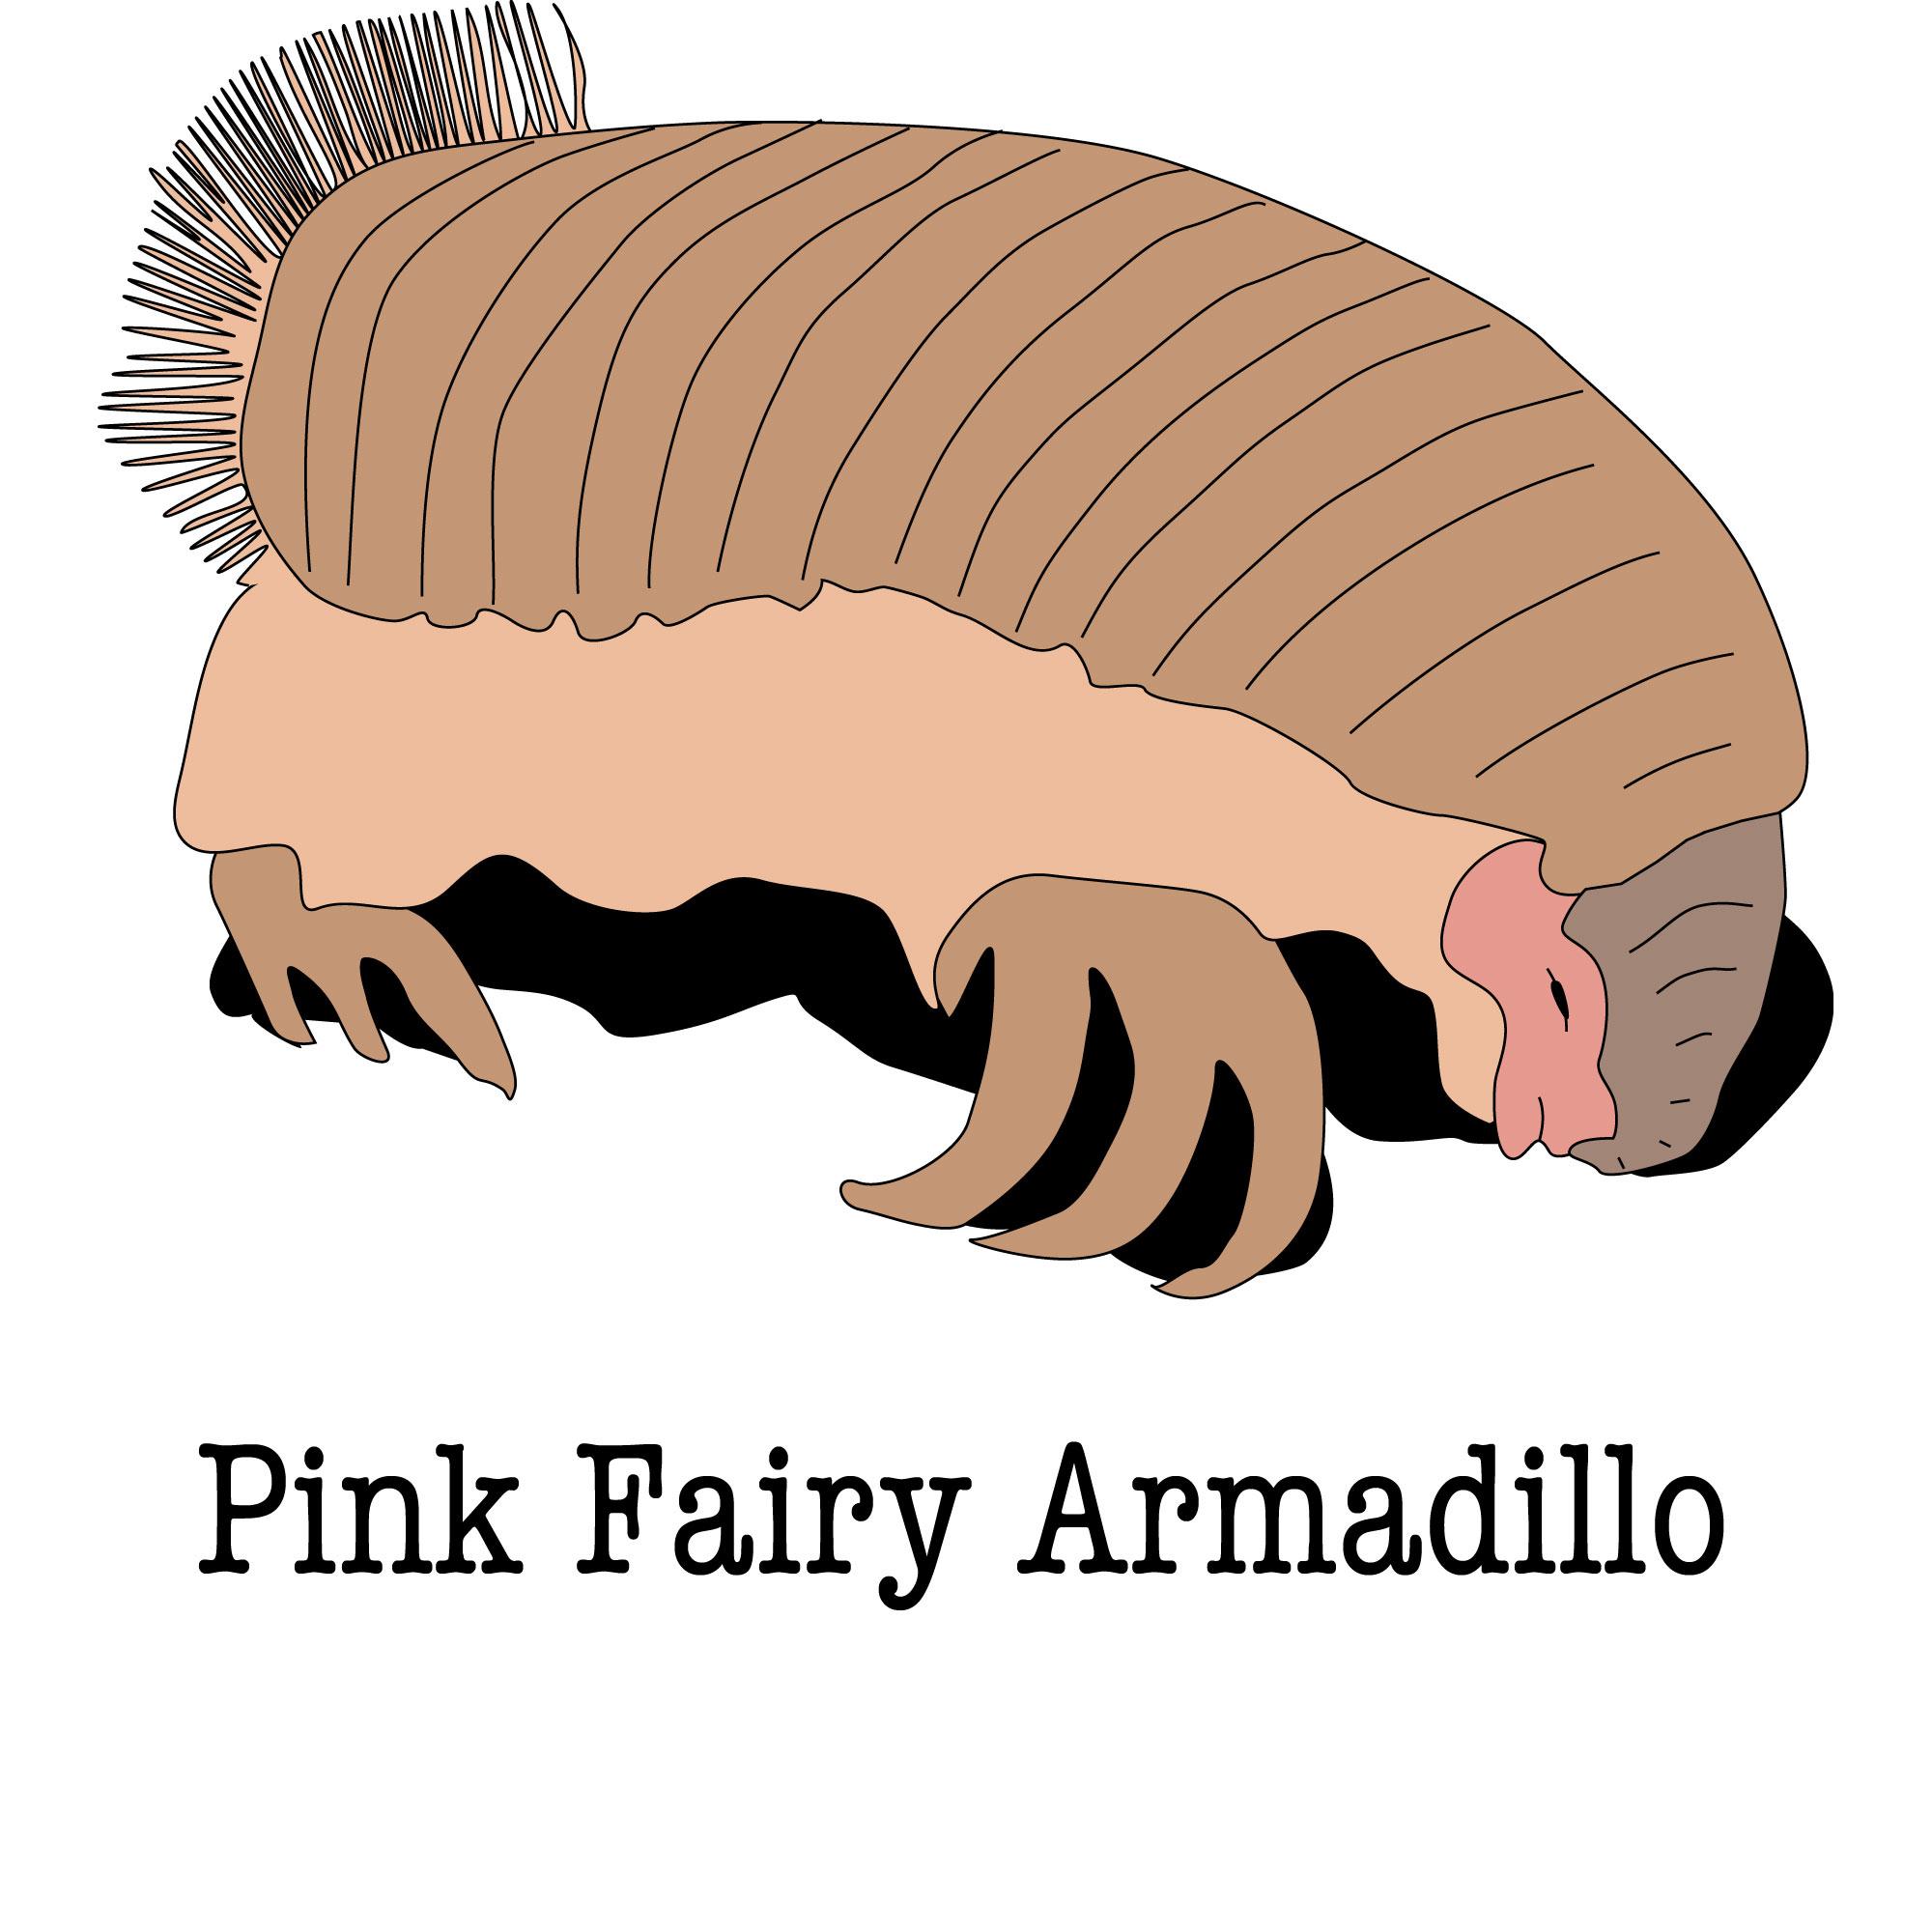 Cartoon Pink Fairy Armadillo - Check out inspiring examples of pink.